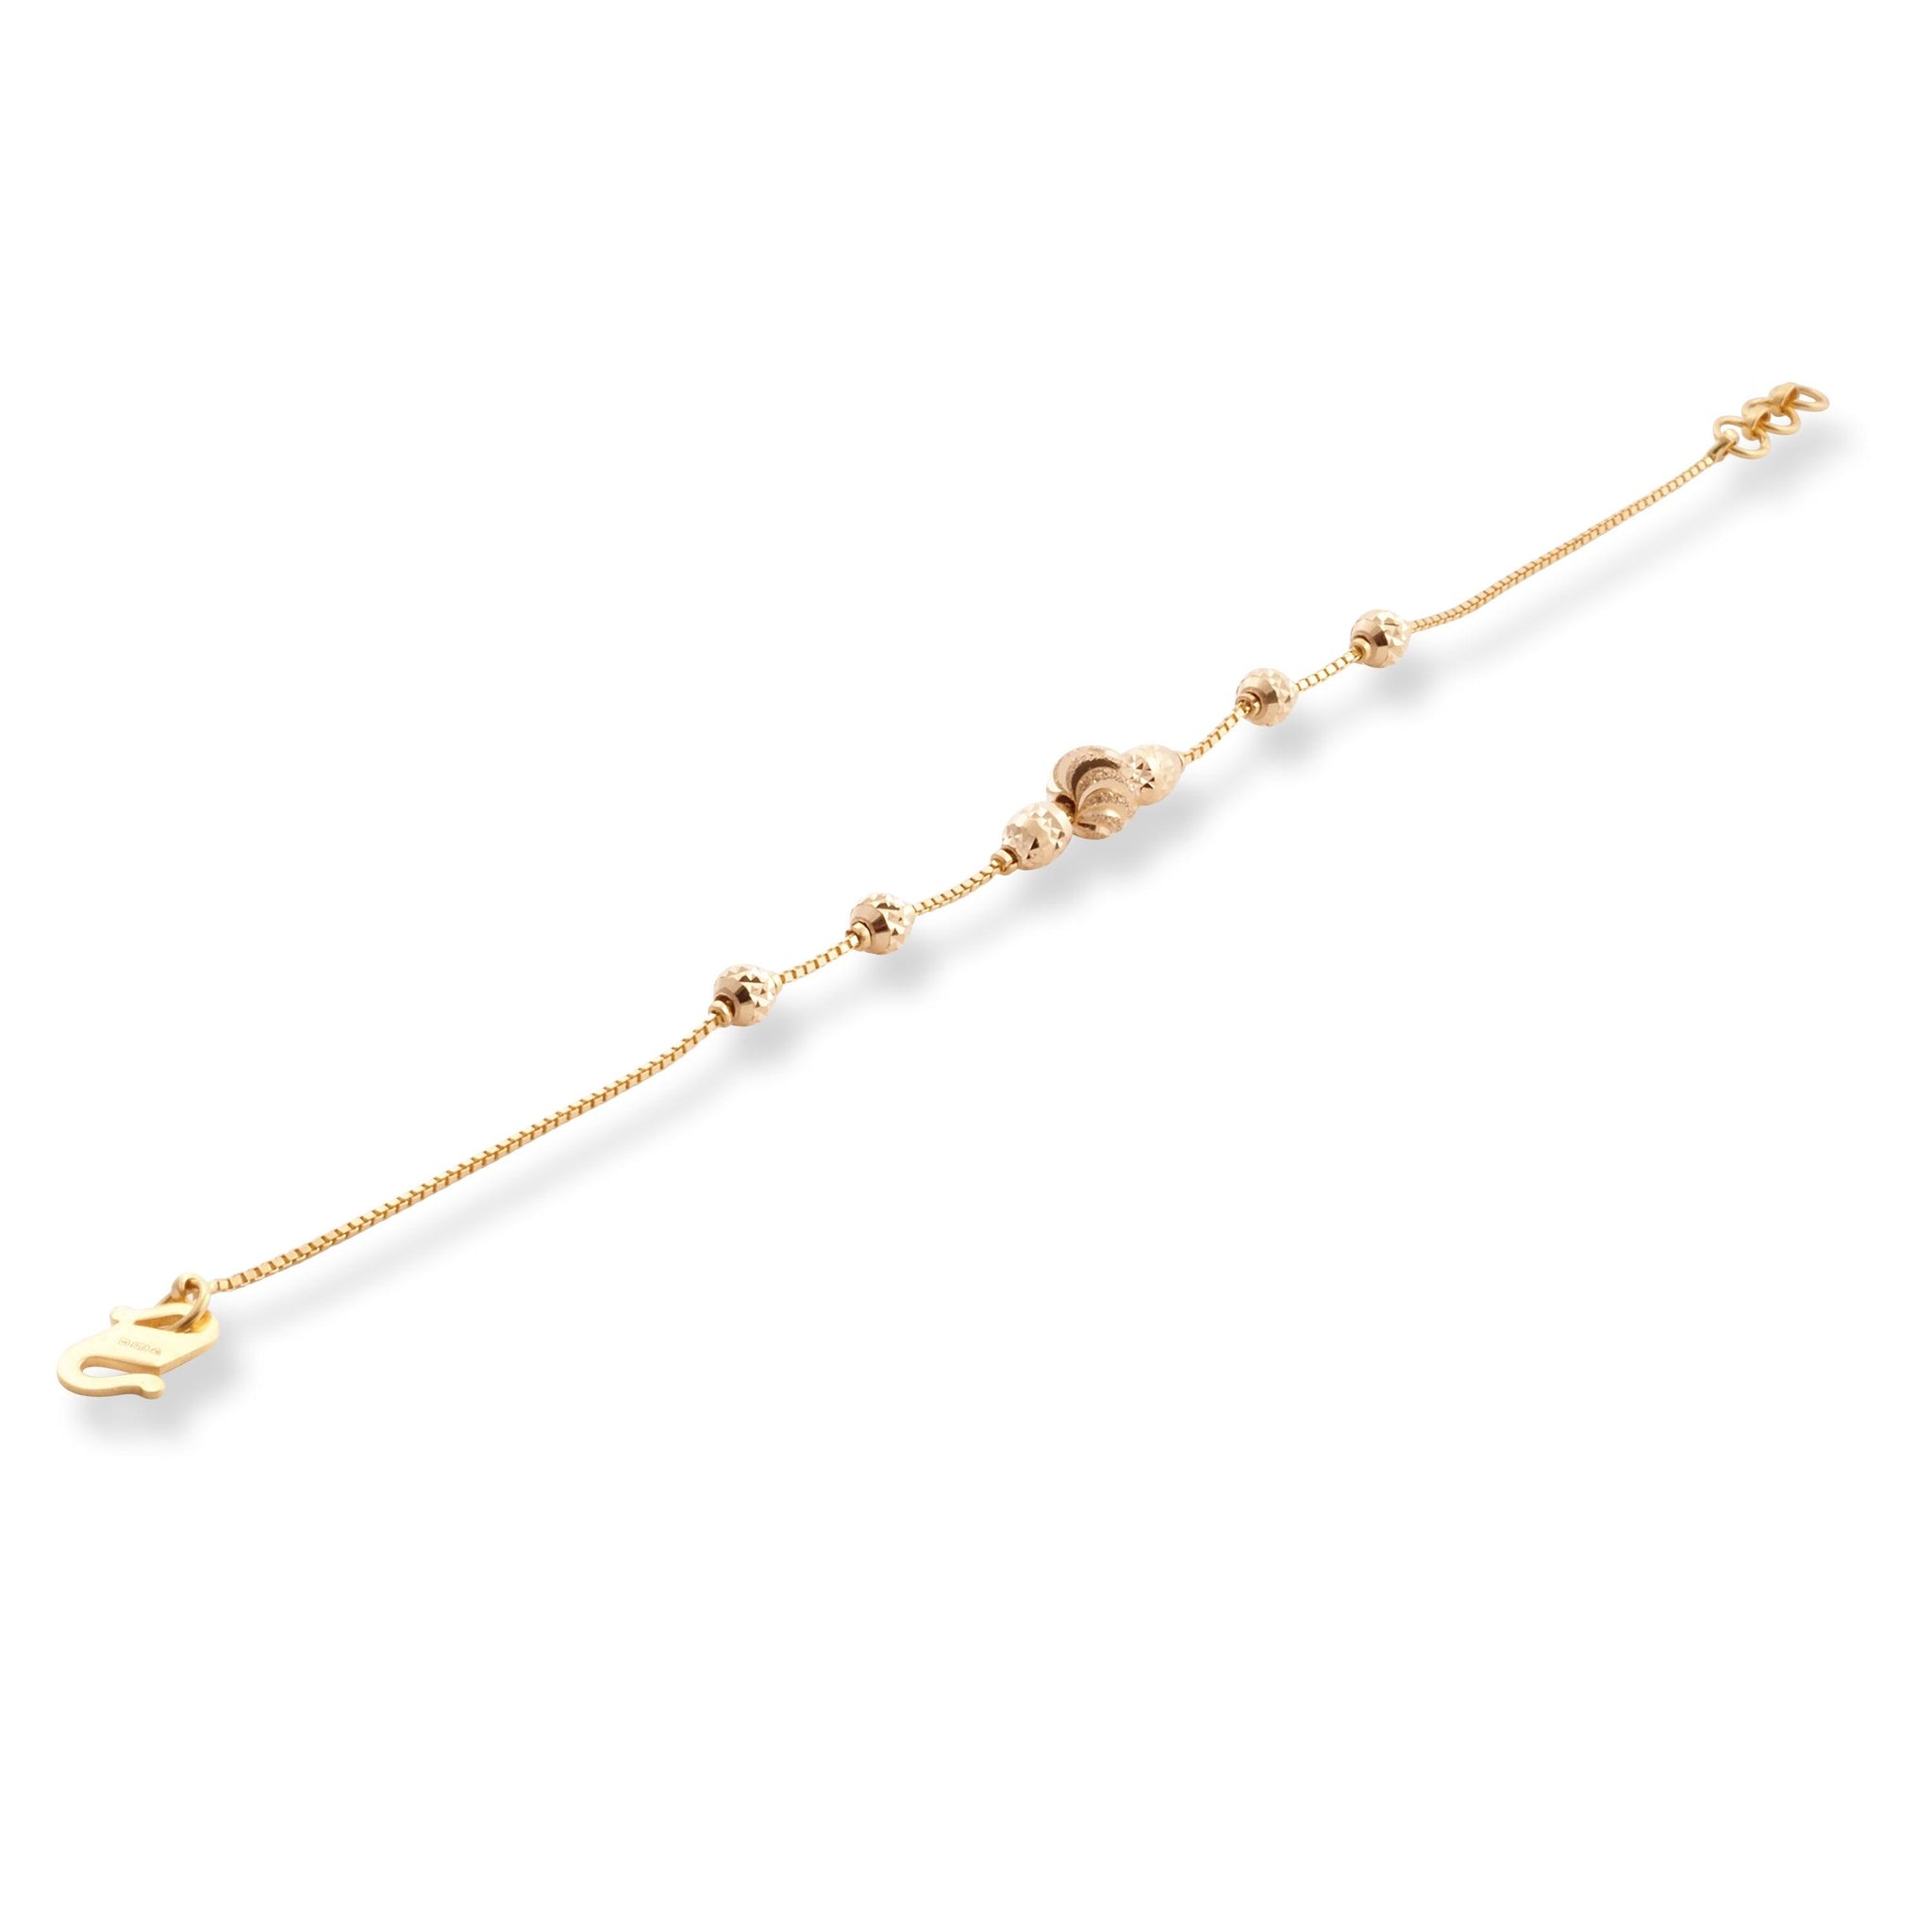 22ct Yellow Gold Bracelet In Diamond Cutting Beads with '' S '' Clasp LBR-8517